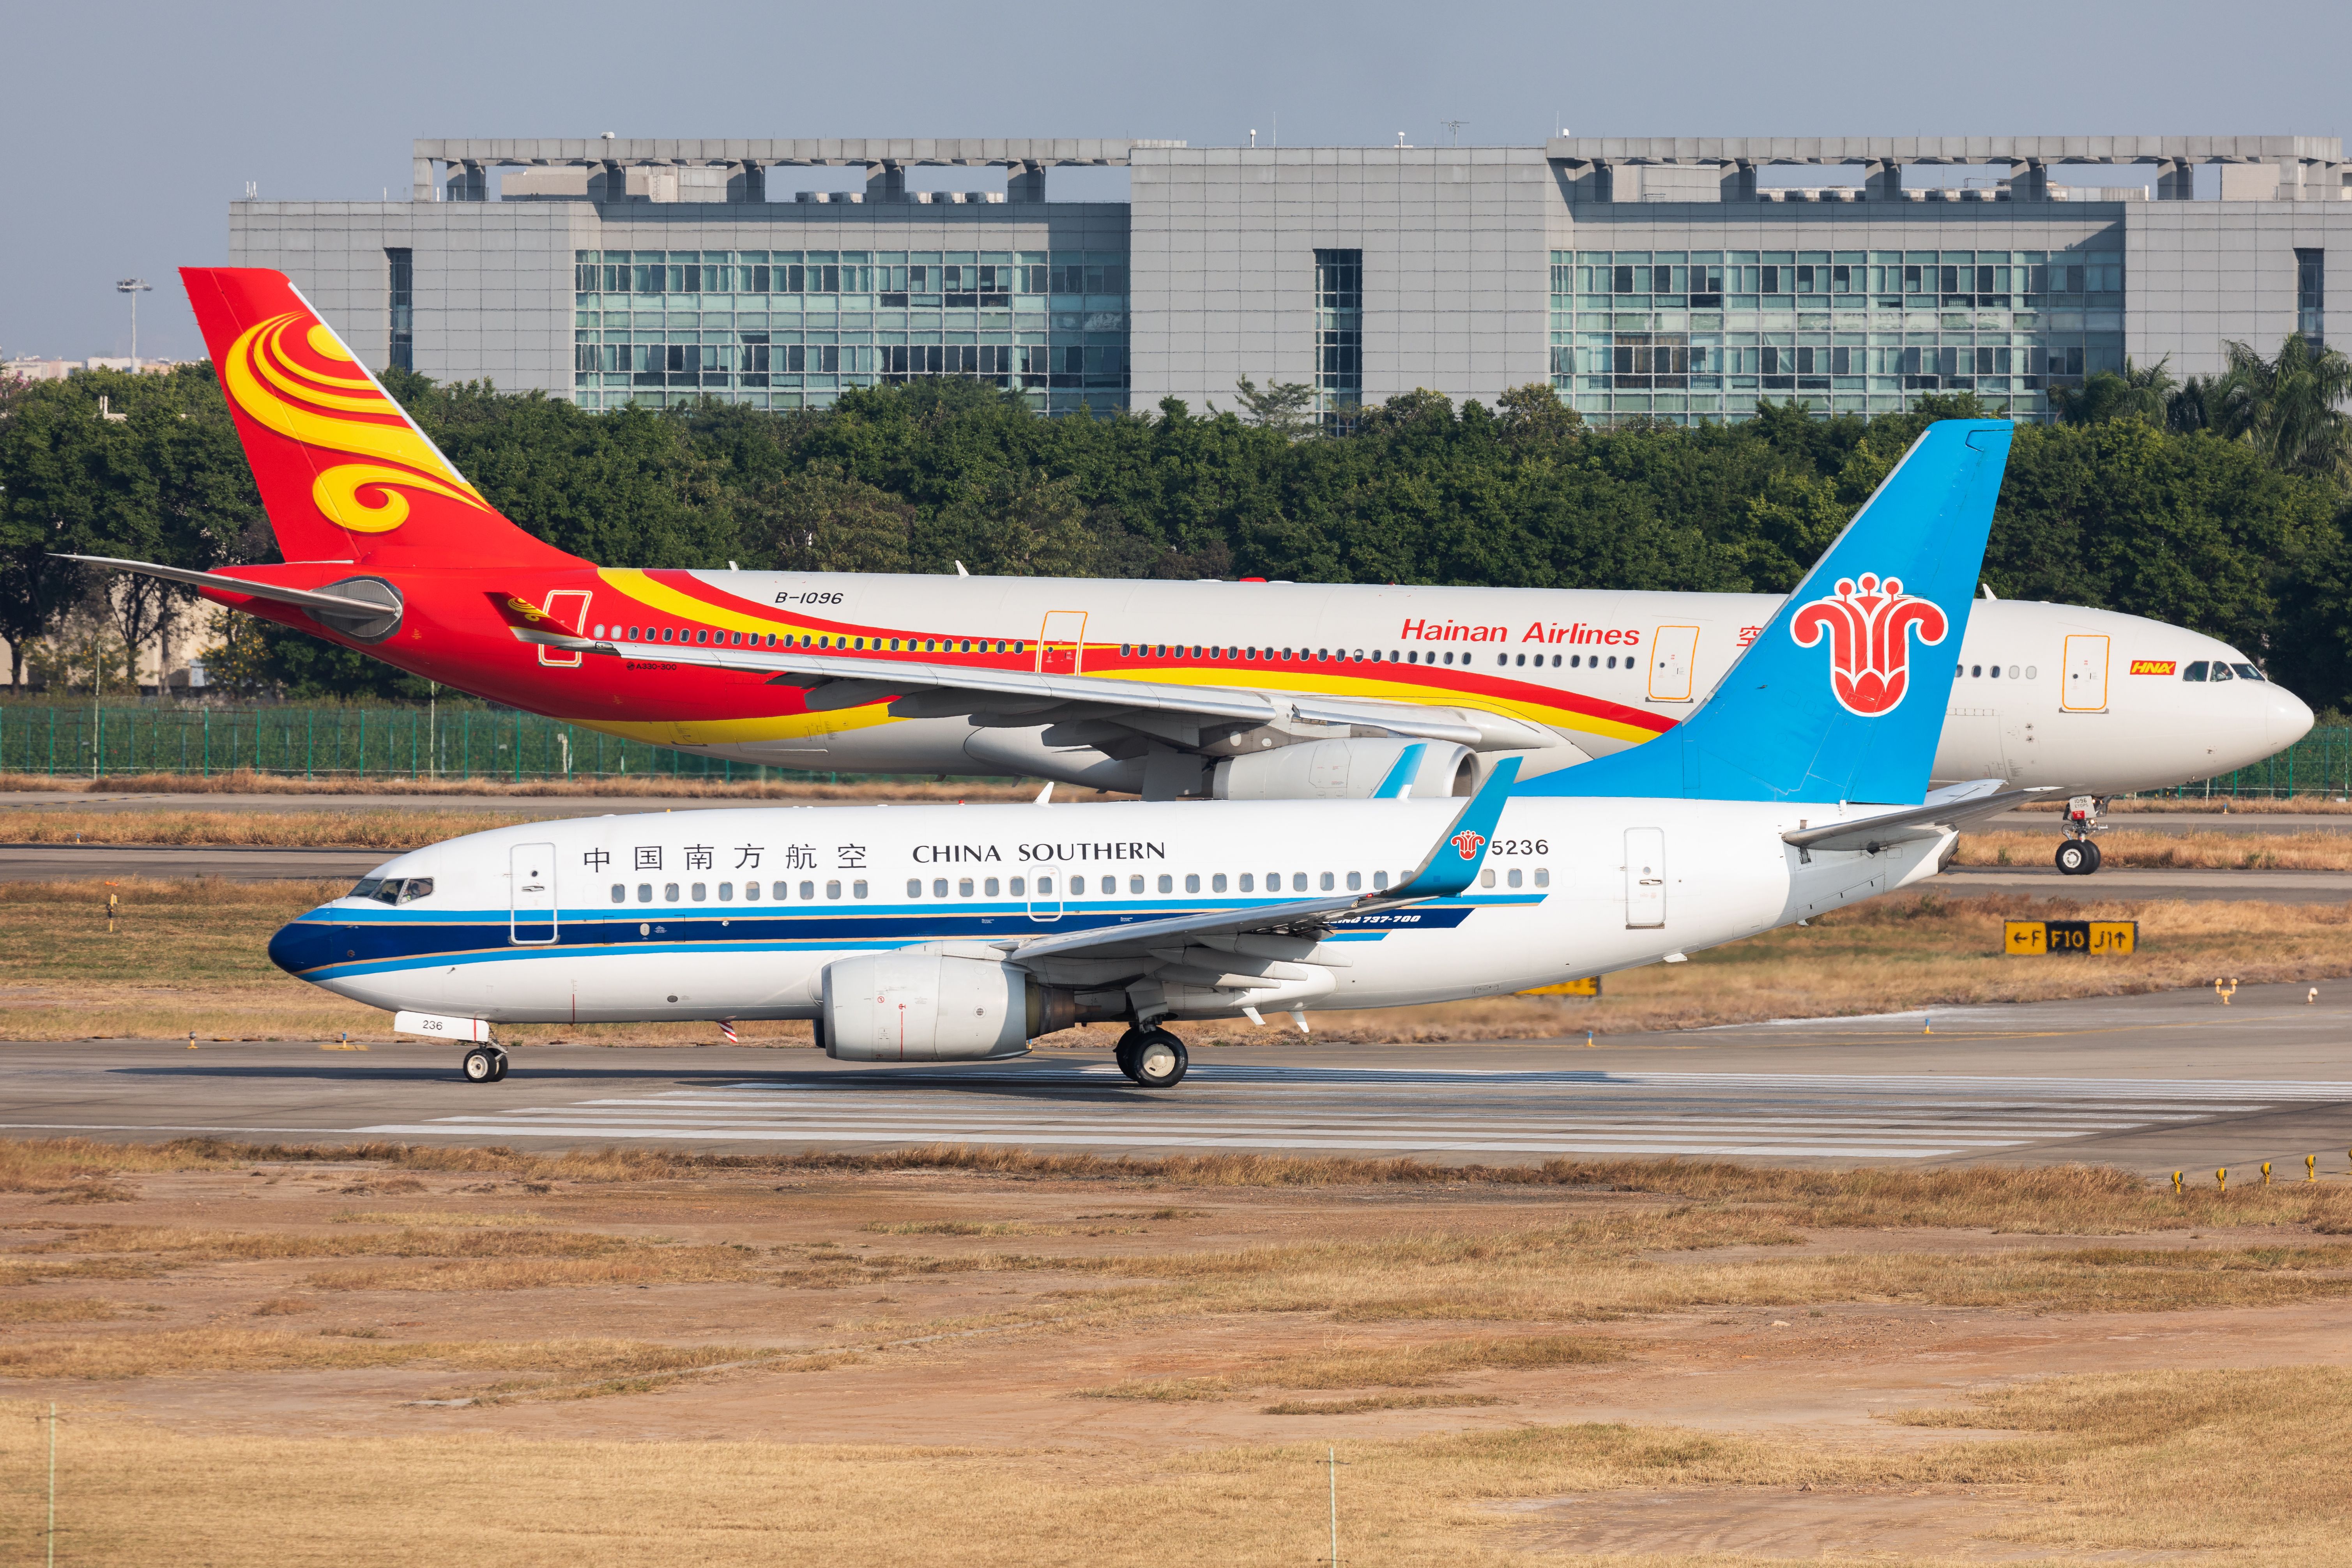 A Hainan Airlines Airbus A330-300 aircraft (back) and a China Southern Airlines Boeing 737-700 aircraft taxis at Guangzhou Baiyun International Airport on December 4, 2020 in Guangzhou, Guangdong Province of China.